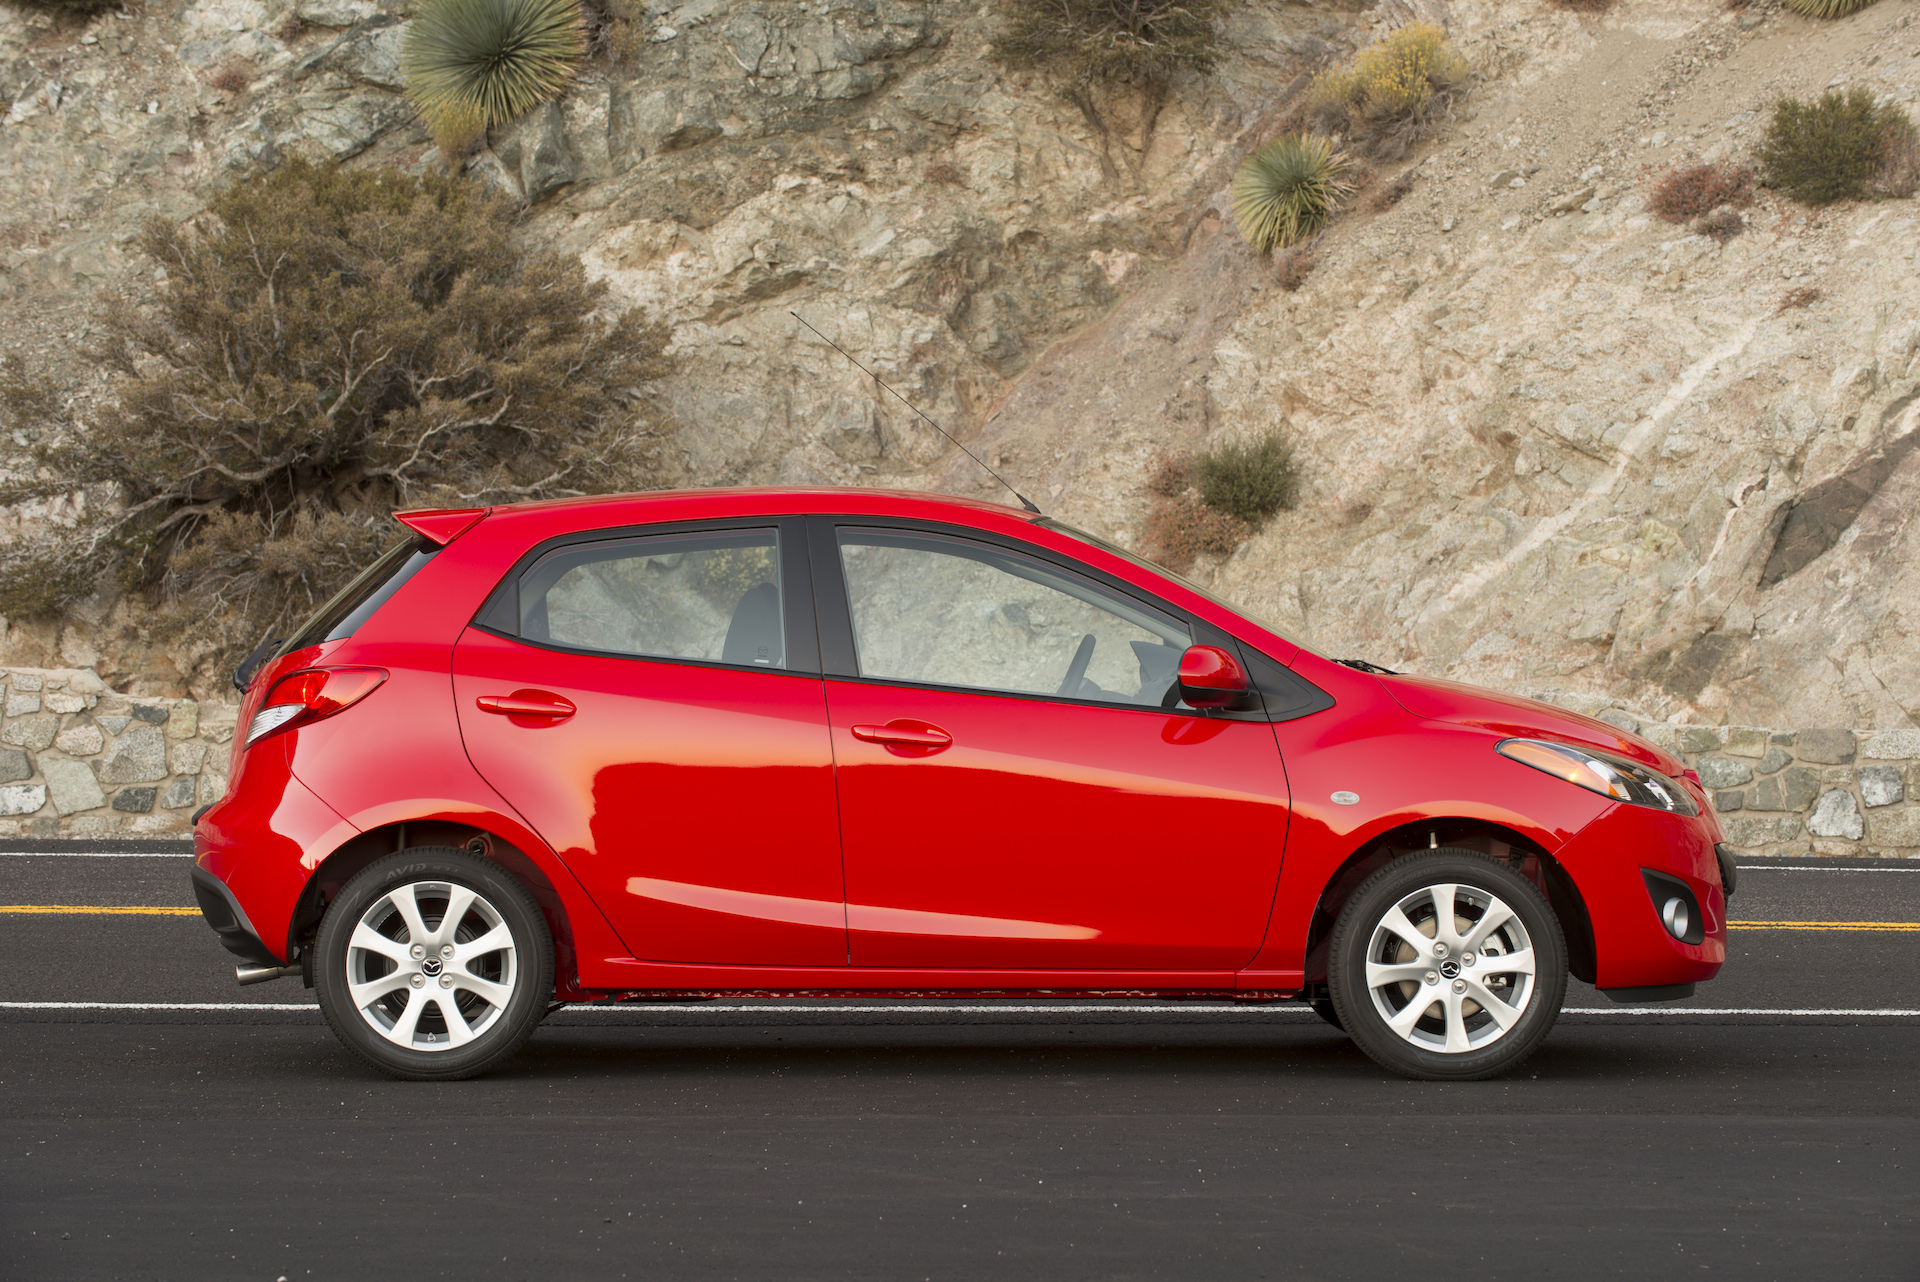 2014 Mazda MAZDA2 Review: Prices, Specs, and Photos - The Car Connection